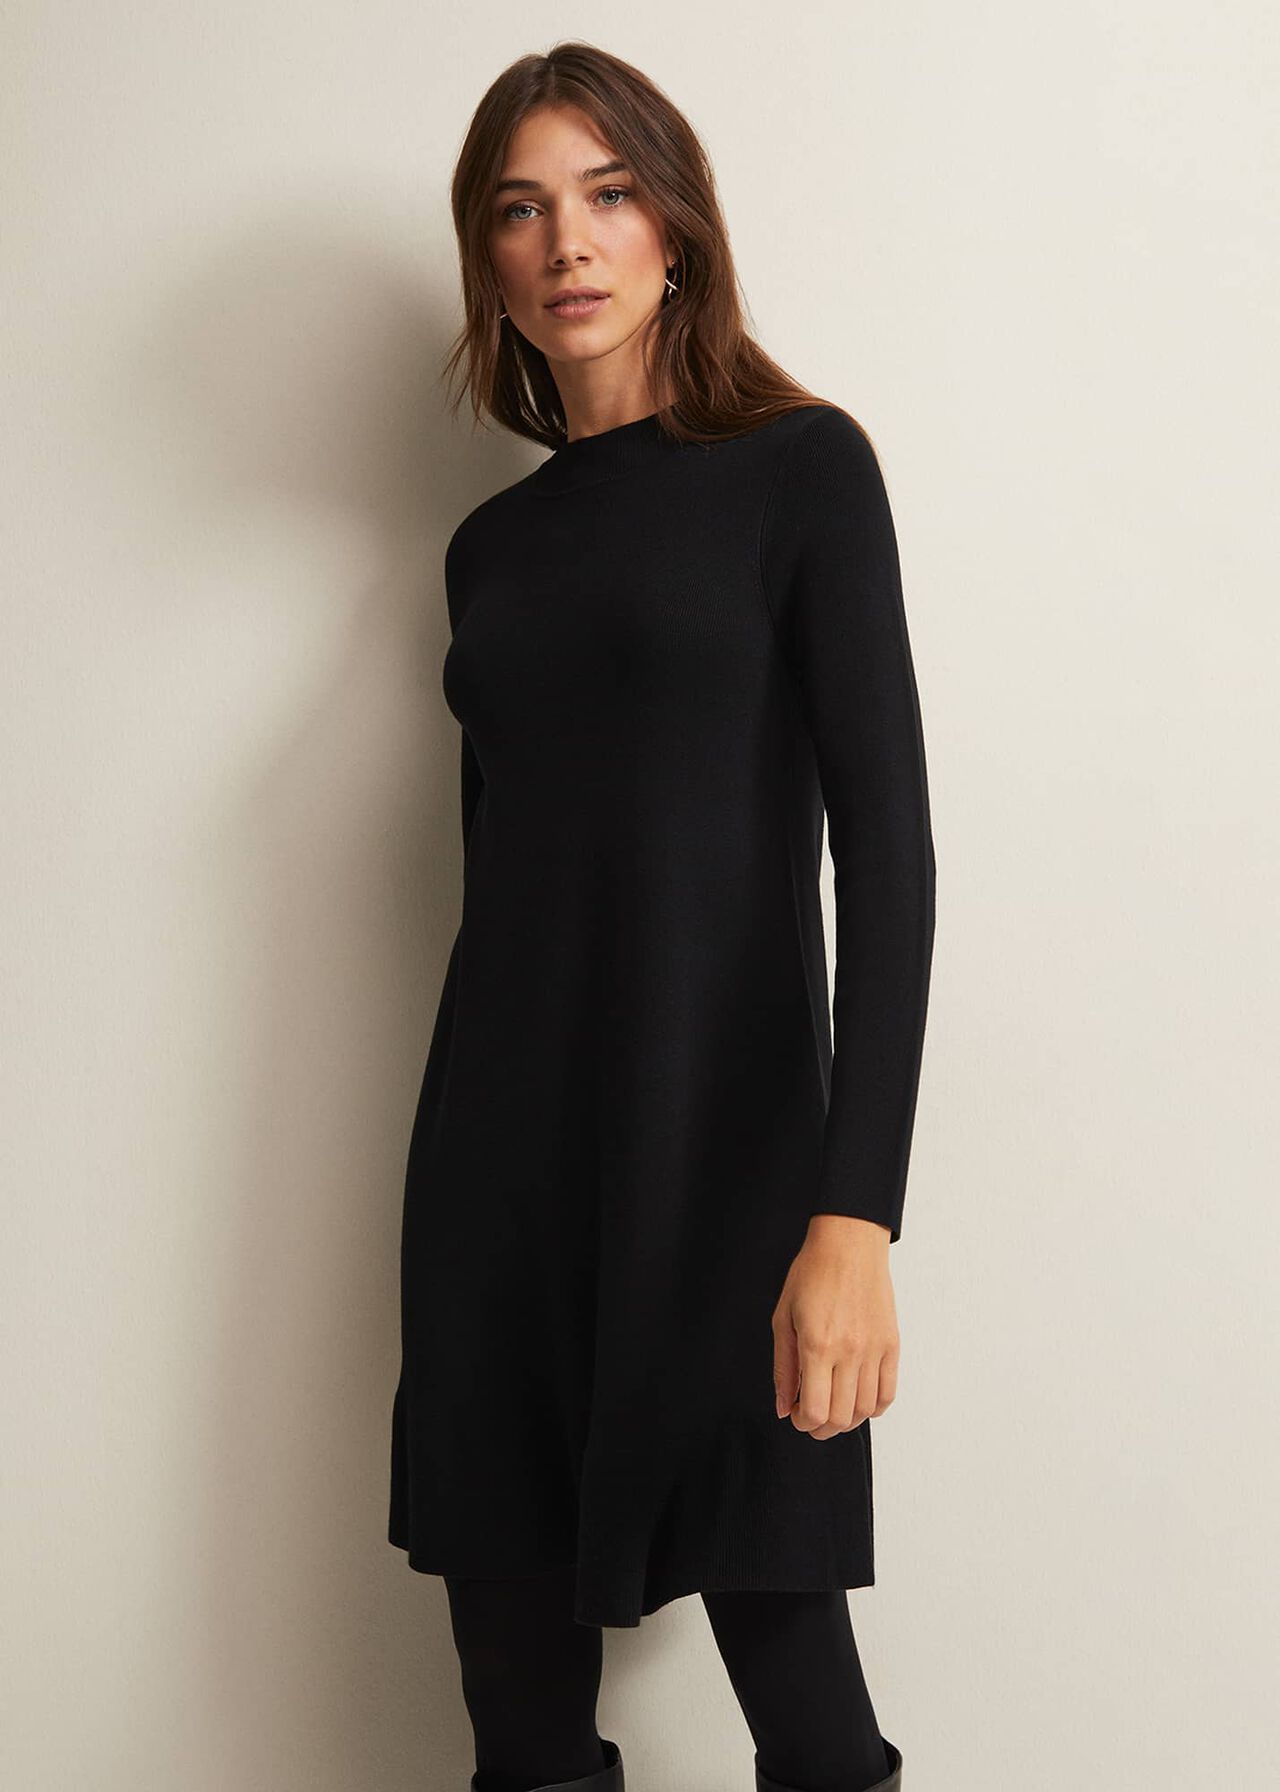 Black Fine Knit Mini Dress with Long Sleeves | Phase Eight